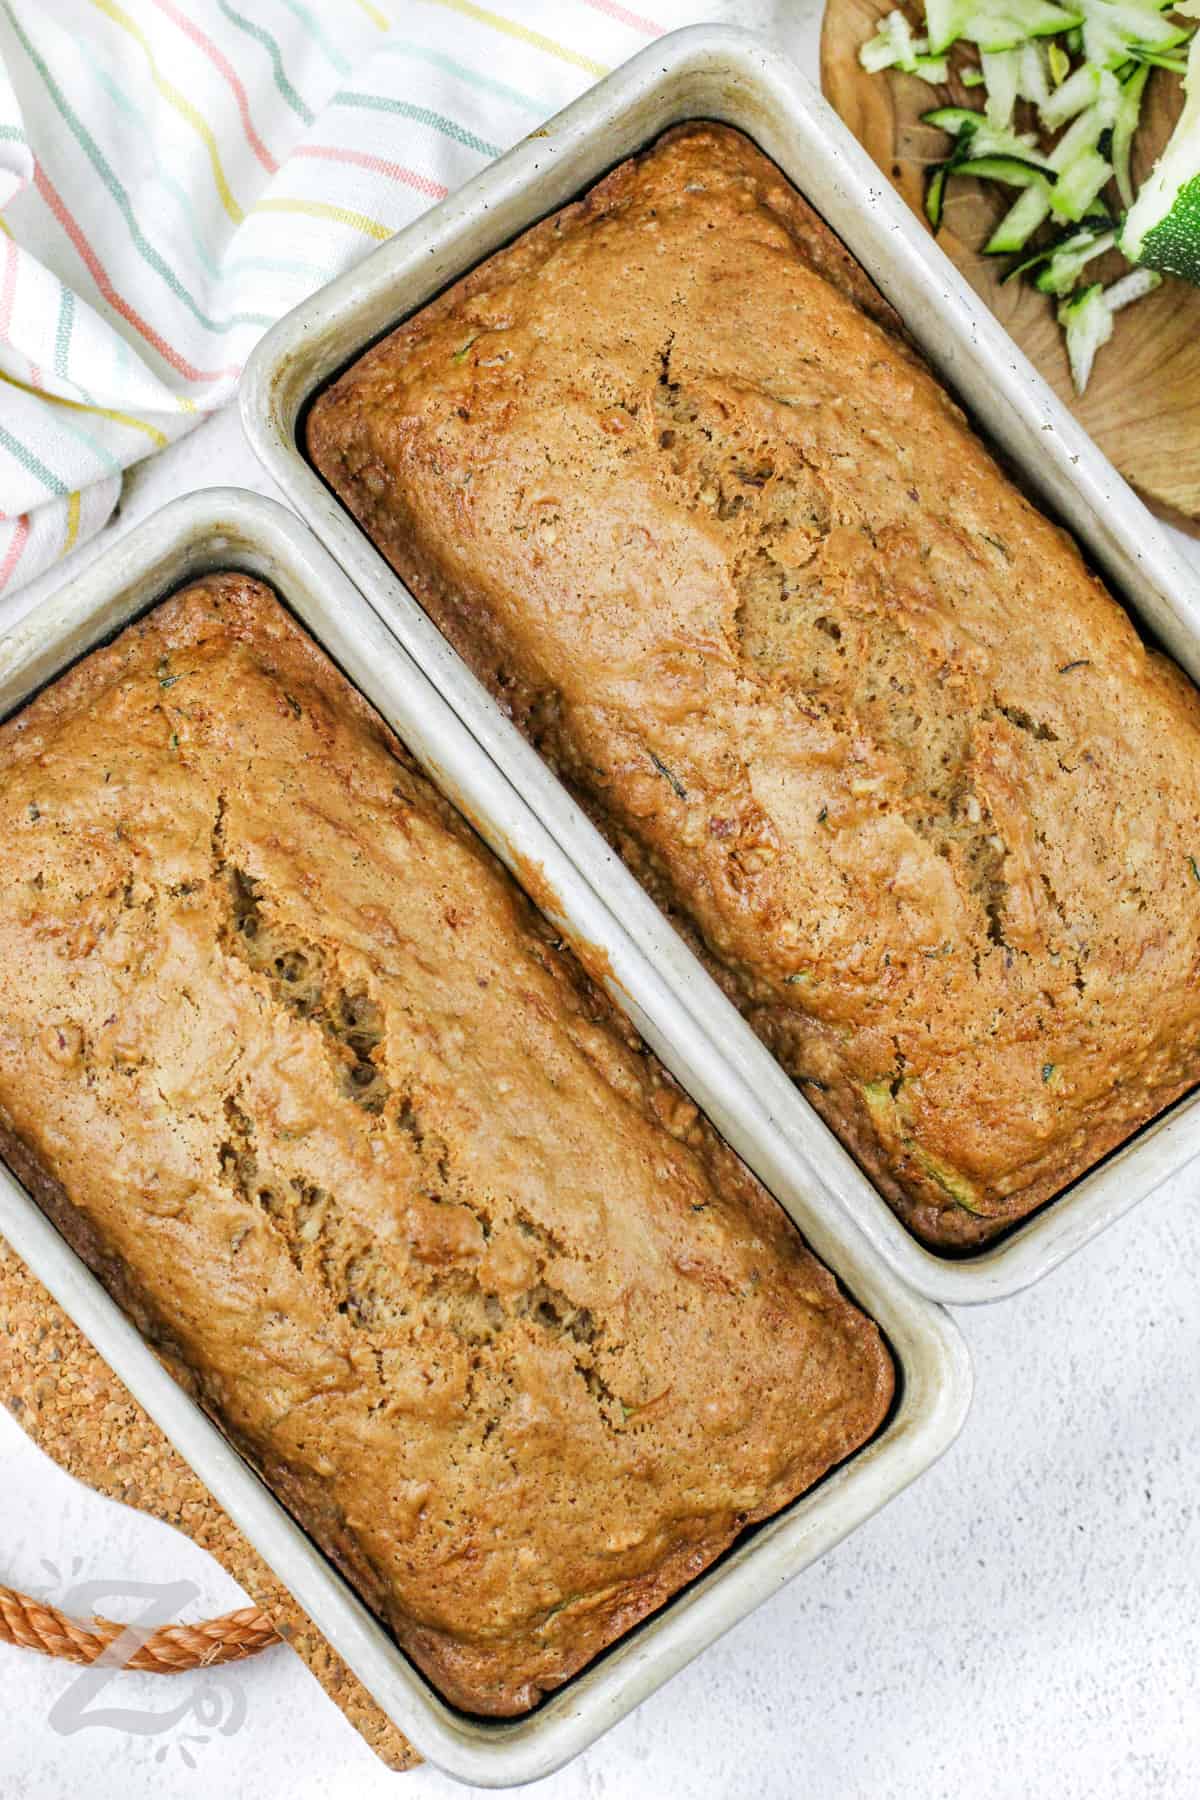 baked loafs of Zucchini Bread in the pan